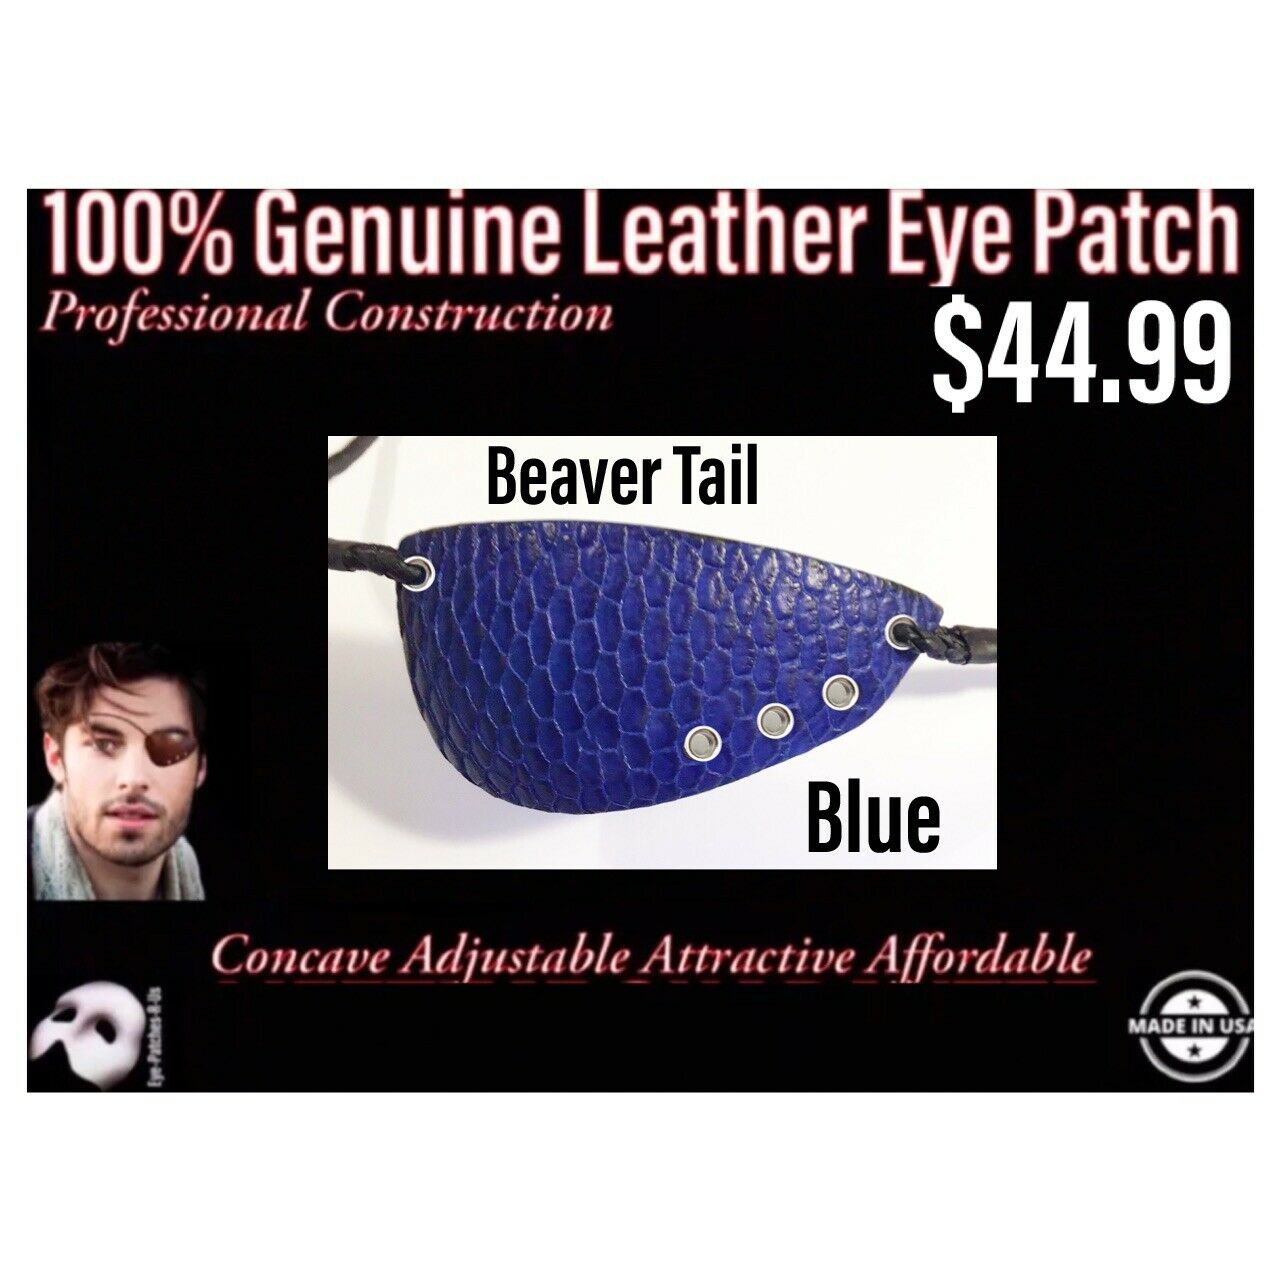 Beaver Tail - Leather Lined Patch At Eye Patches R Us - C.o.a. - Crenshaw Cut